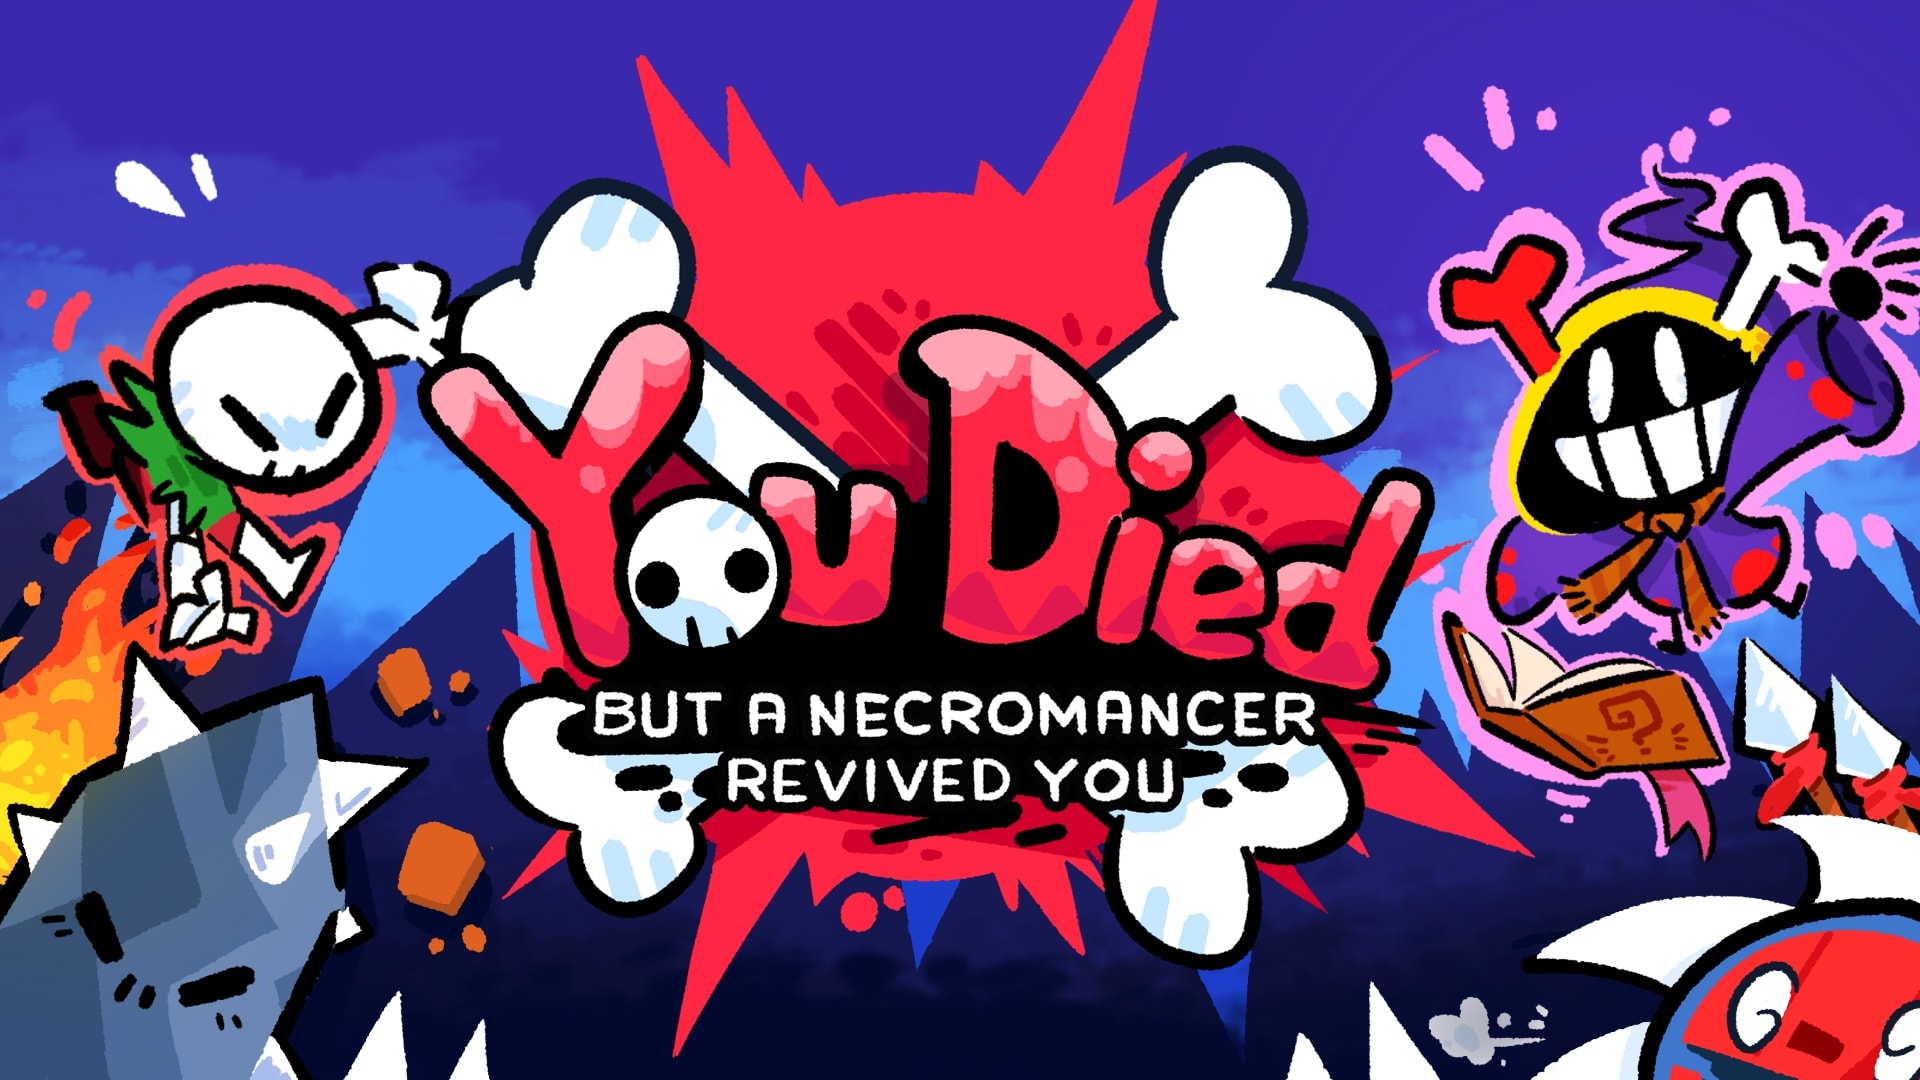 You Died but a Necromancer revived you